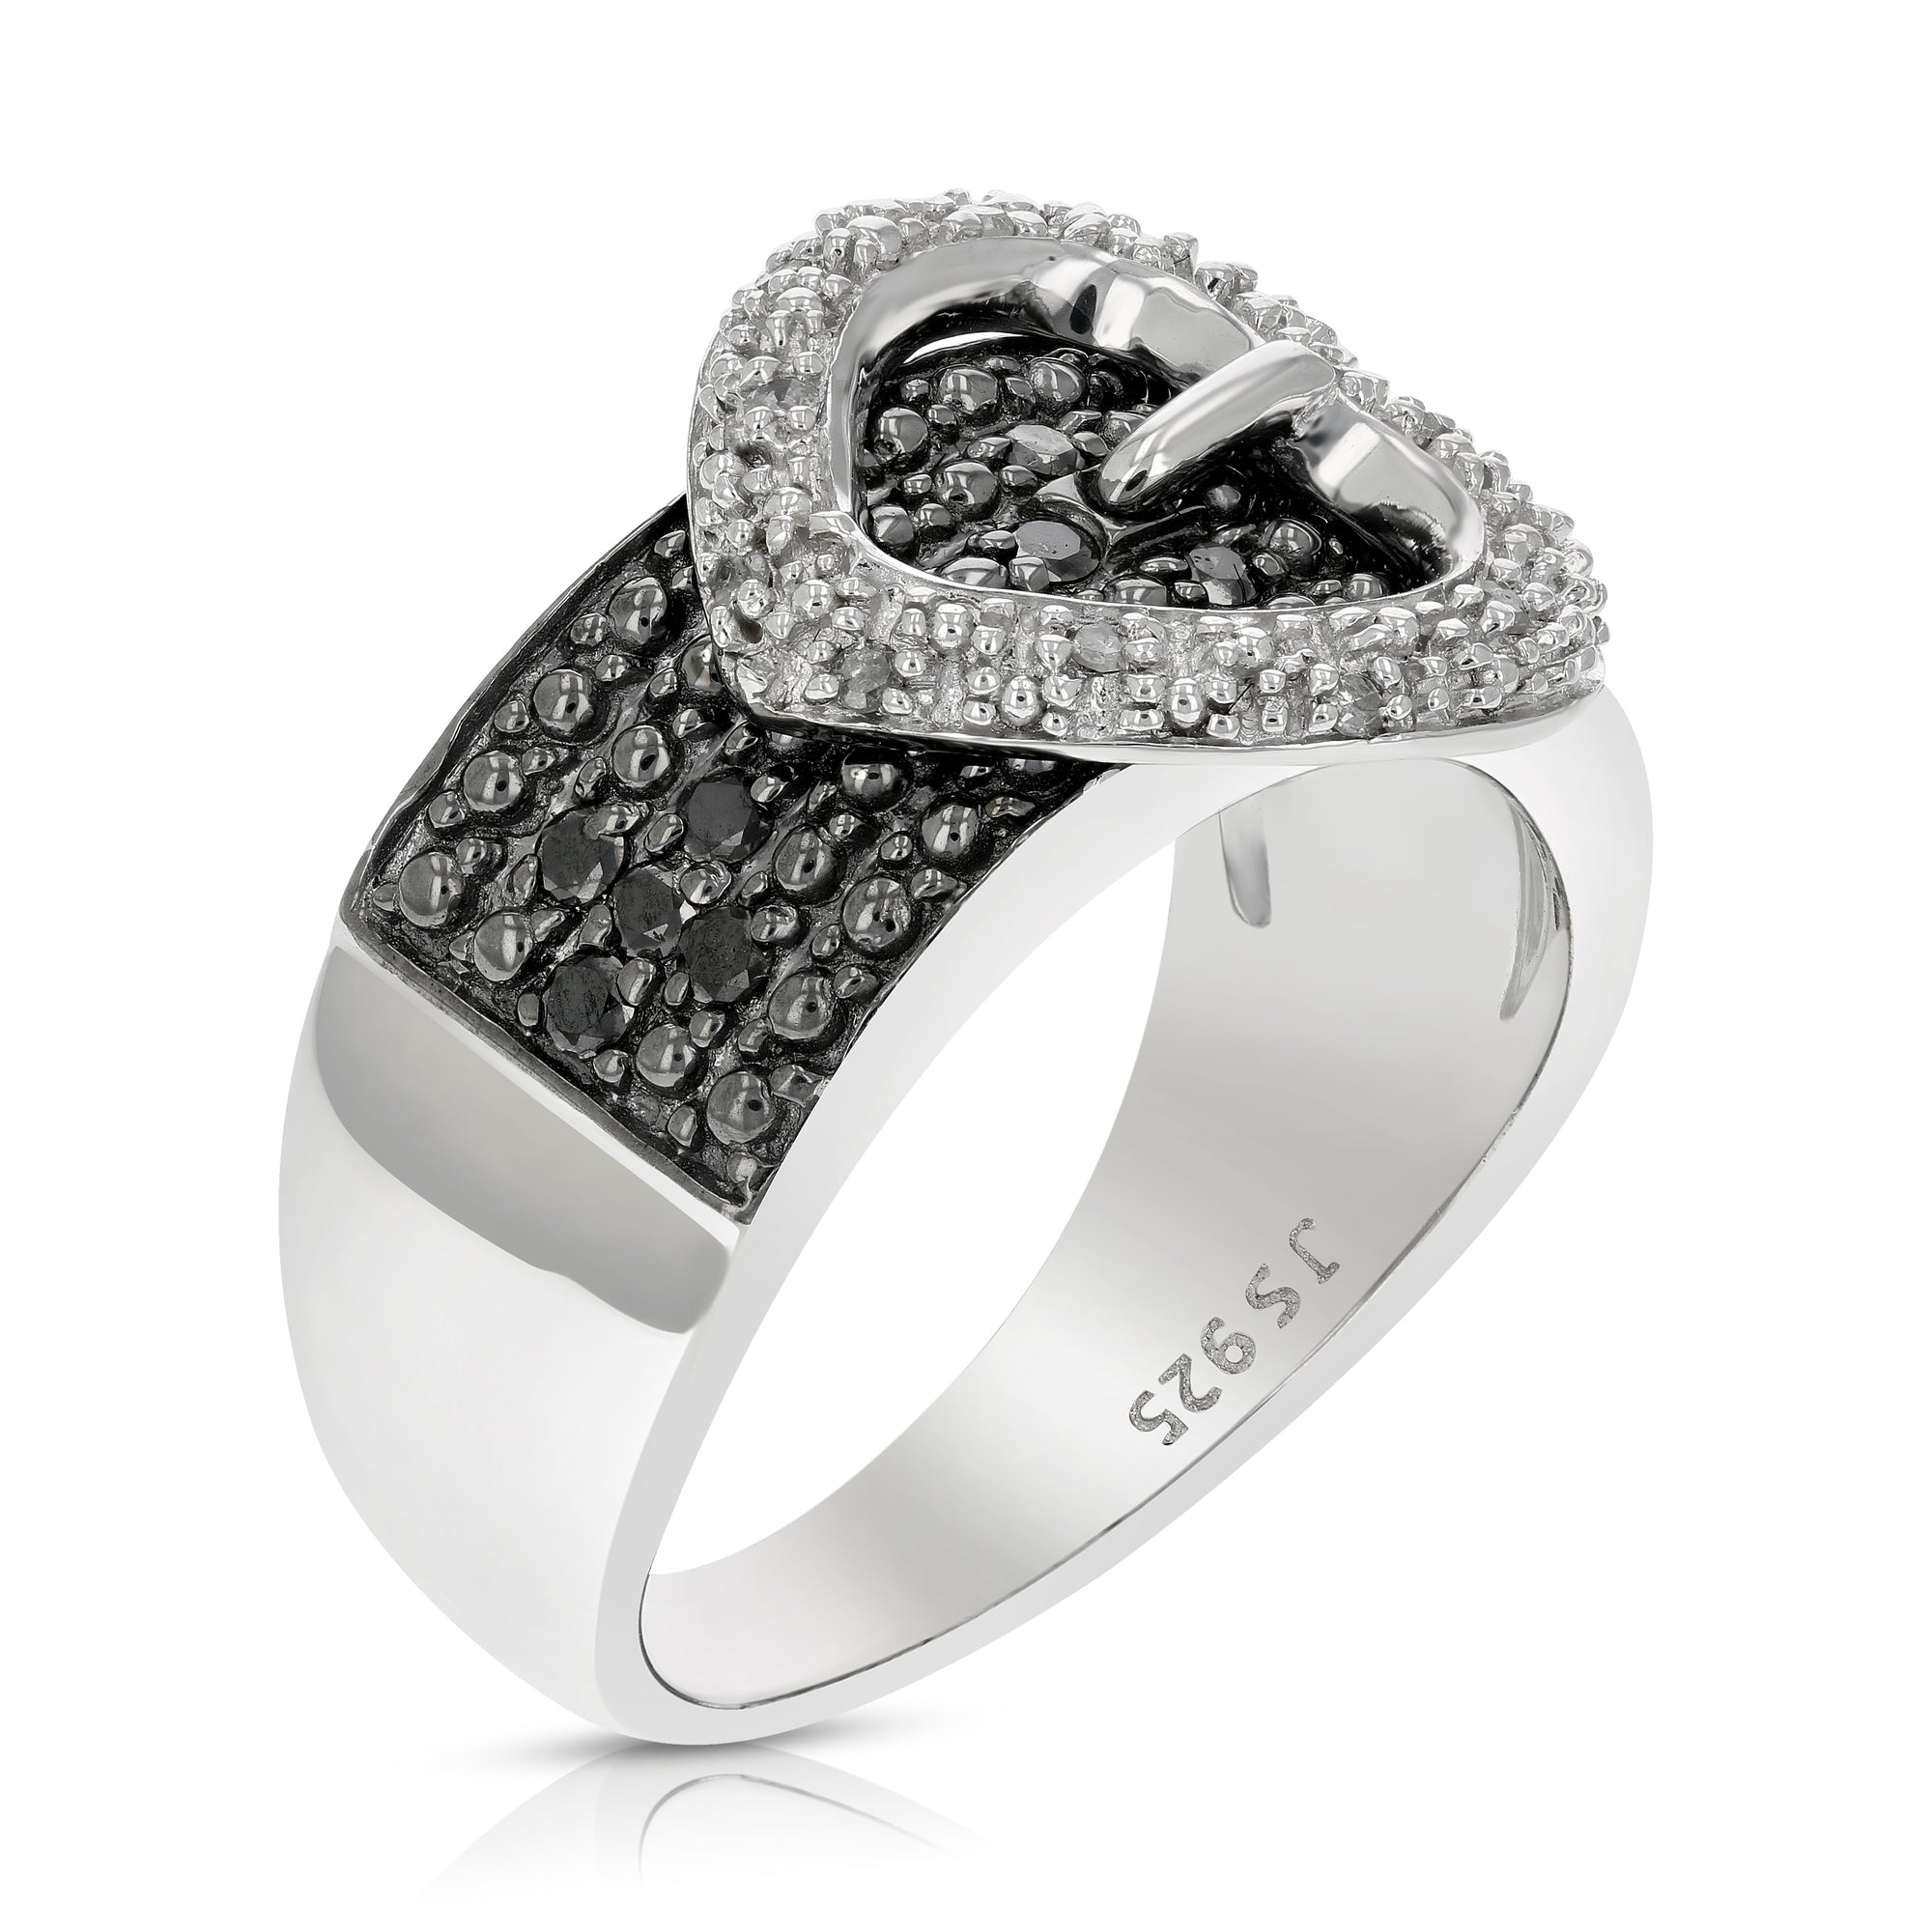 1/4 cttw Black and White Diamond Buckle Ring in .925 Sterling Silver Rhodium